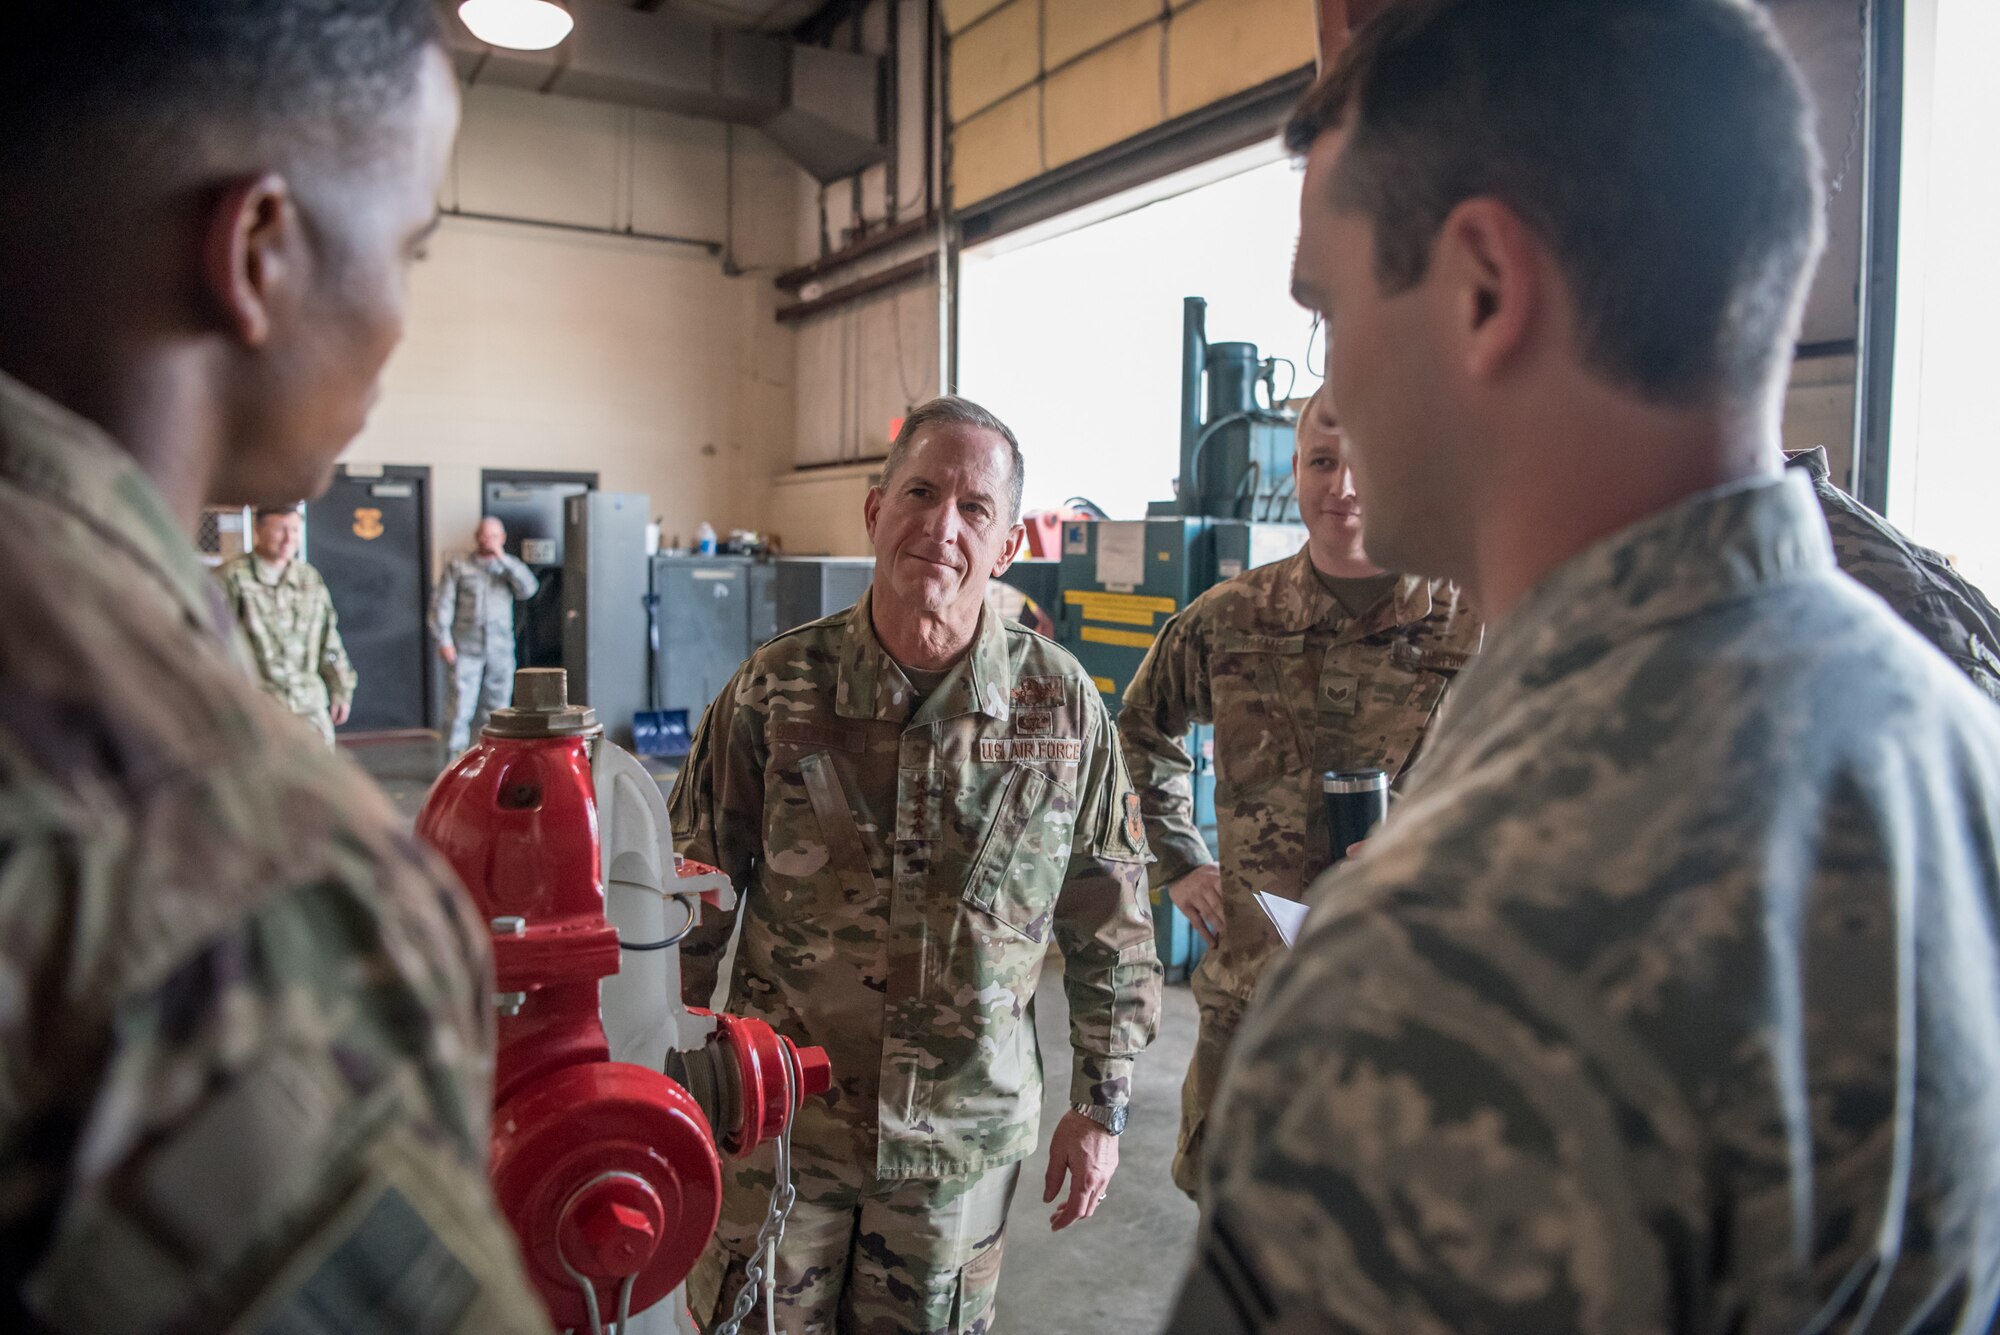 Air Force Chief of Staff Gen. David L. Goldfein speaks with Airmen as he tours the Kentucky Air National Guard base in Louisville, Ky., Aug. 10, 2019. During his visit, Goldfein saw various work centers, learning about the unique mission sets of the 123rd Airlift Wing. (U.S. Air National Guard photo by Staff Sgt. Joshua Horton)